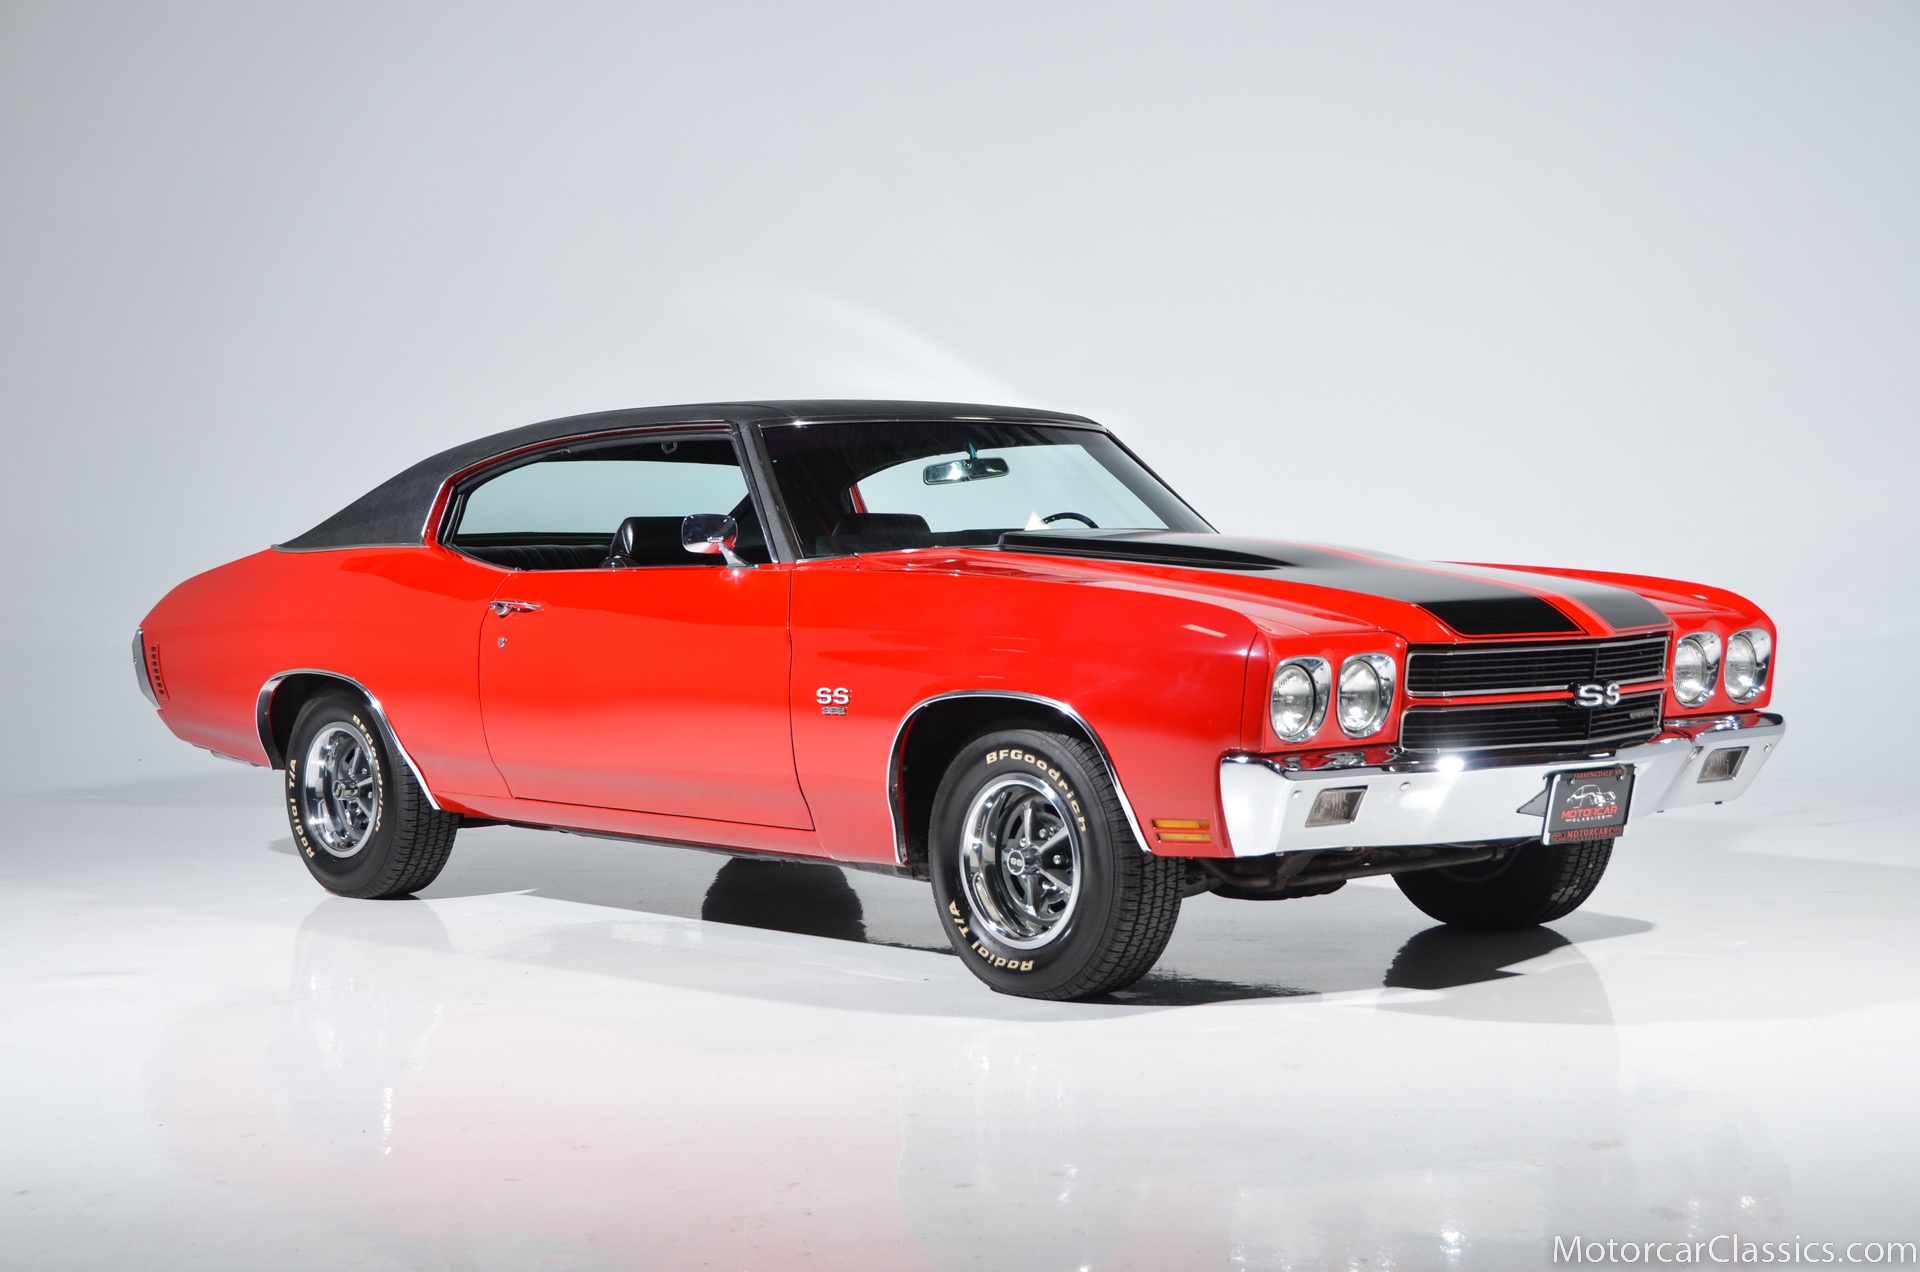 Used 1970 Chevrolet Chevelle SS For Sale 89 900 Motorcar Classics